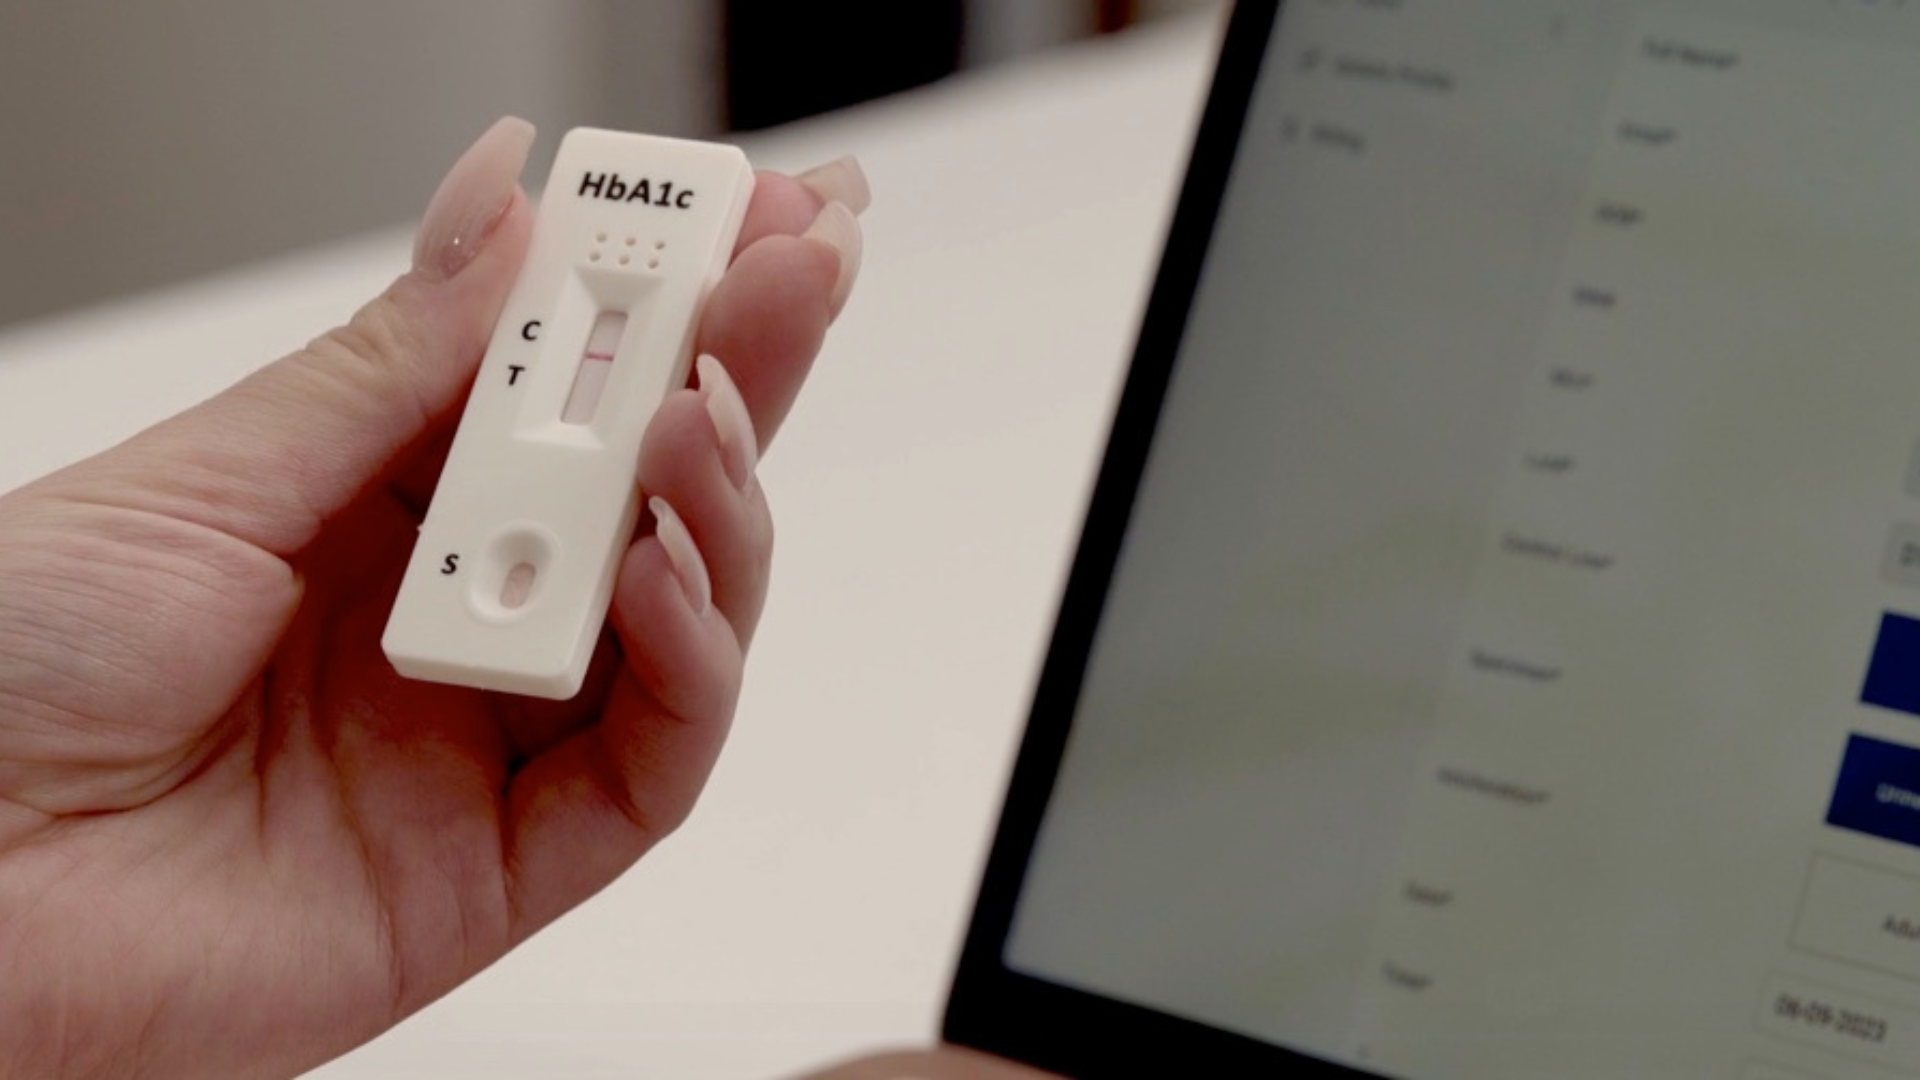 A close-up of a hand holding an HbA1c rapid test device, with a laptop in the background displaying data on the screen.